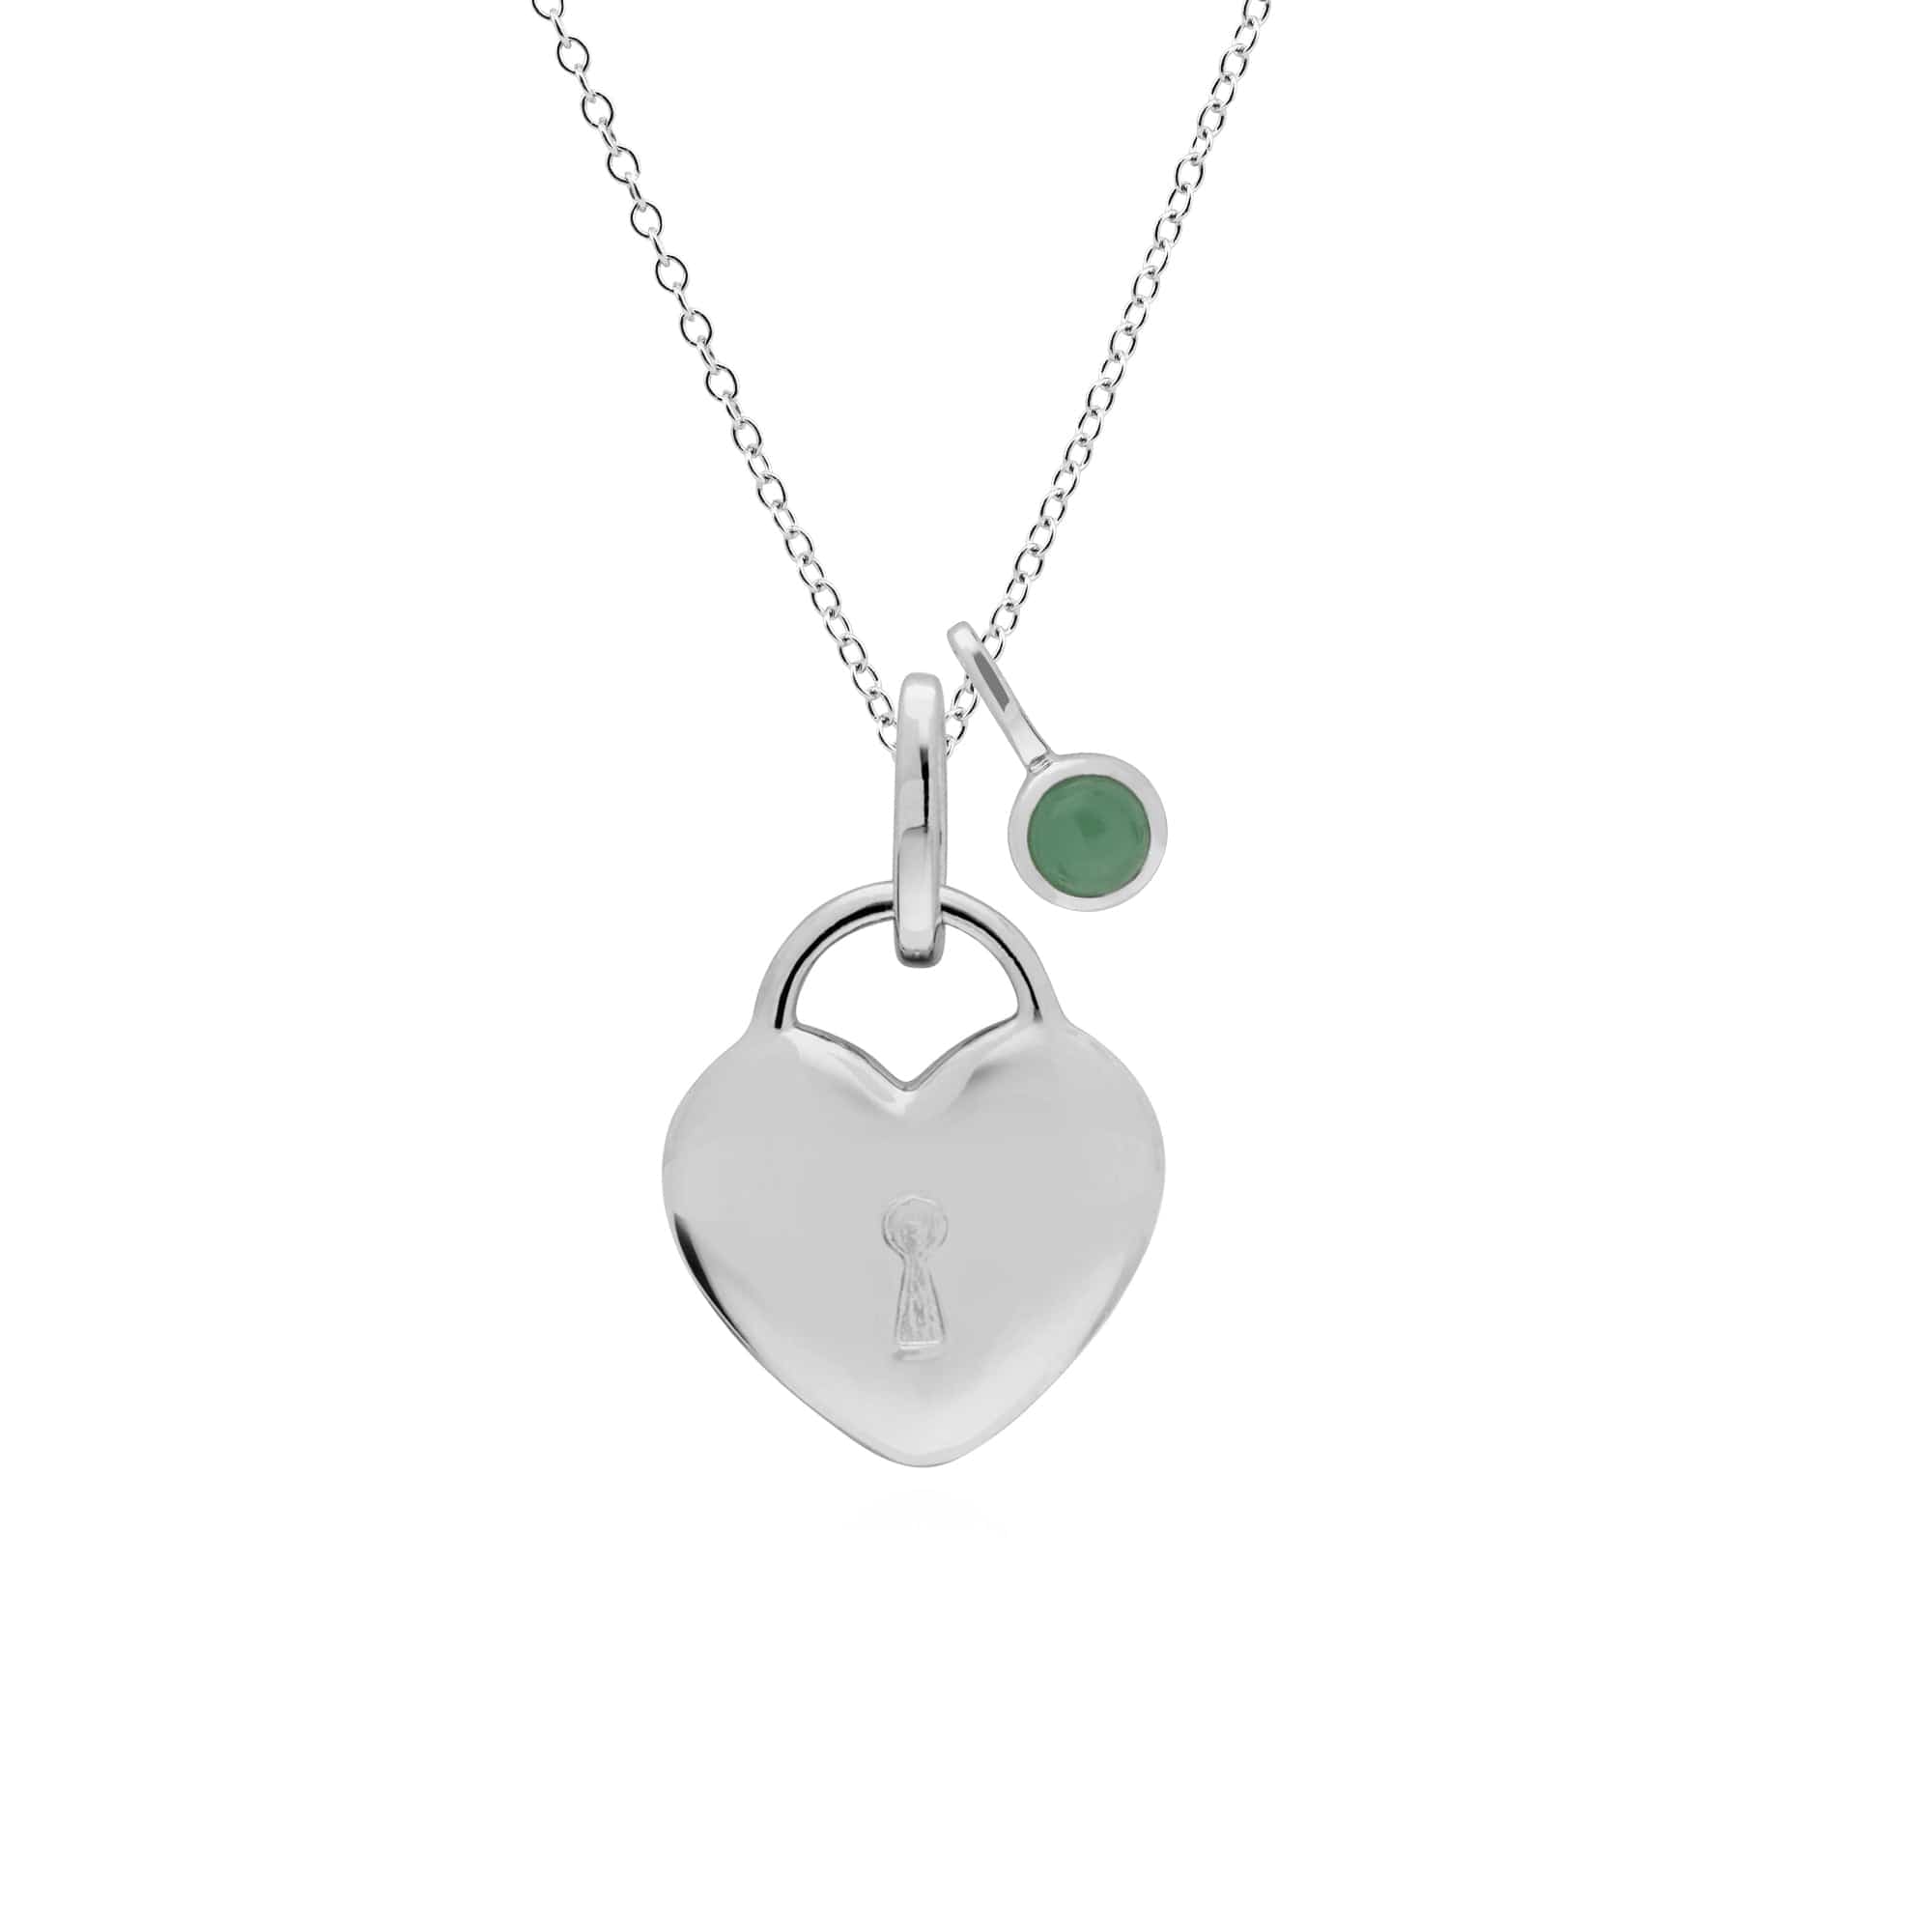 270P028403925-270P027001925 Classic Heart Lock Pendant & Jade Charm in 925 Sterling Silver 1